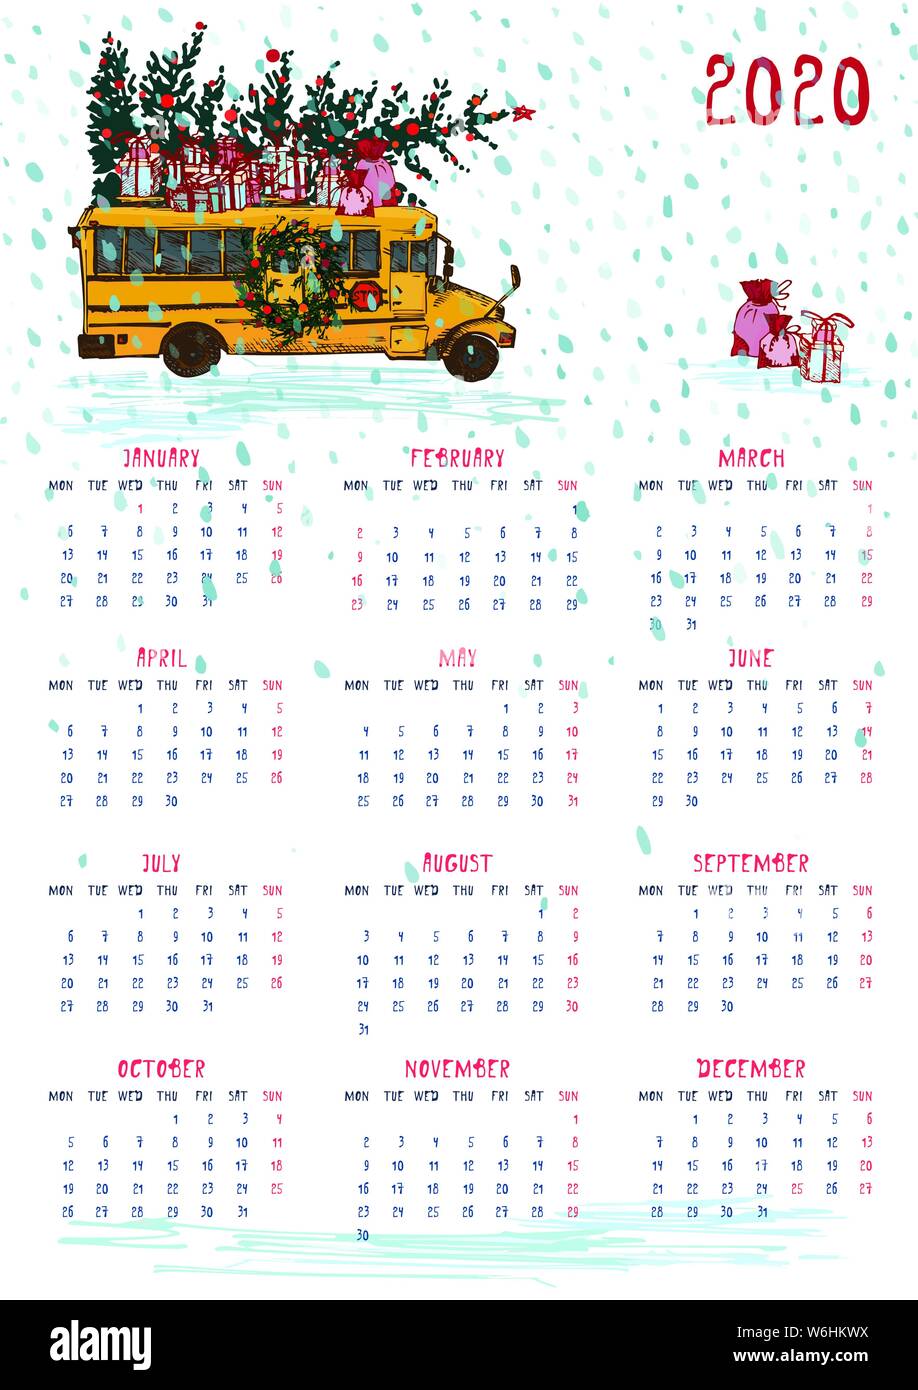 2020 Calendar Planner Whith With Yellow School Bus New